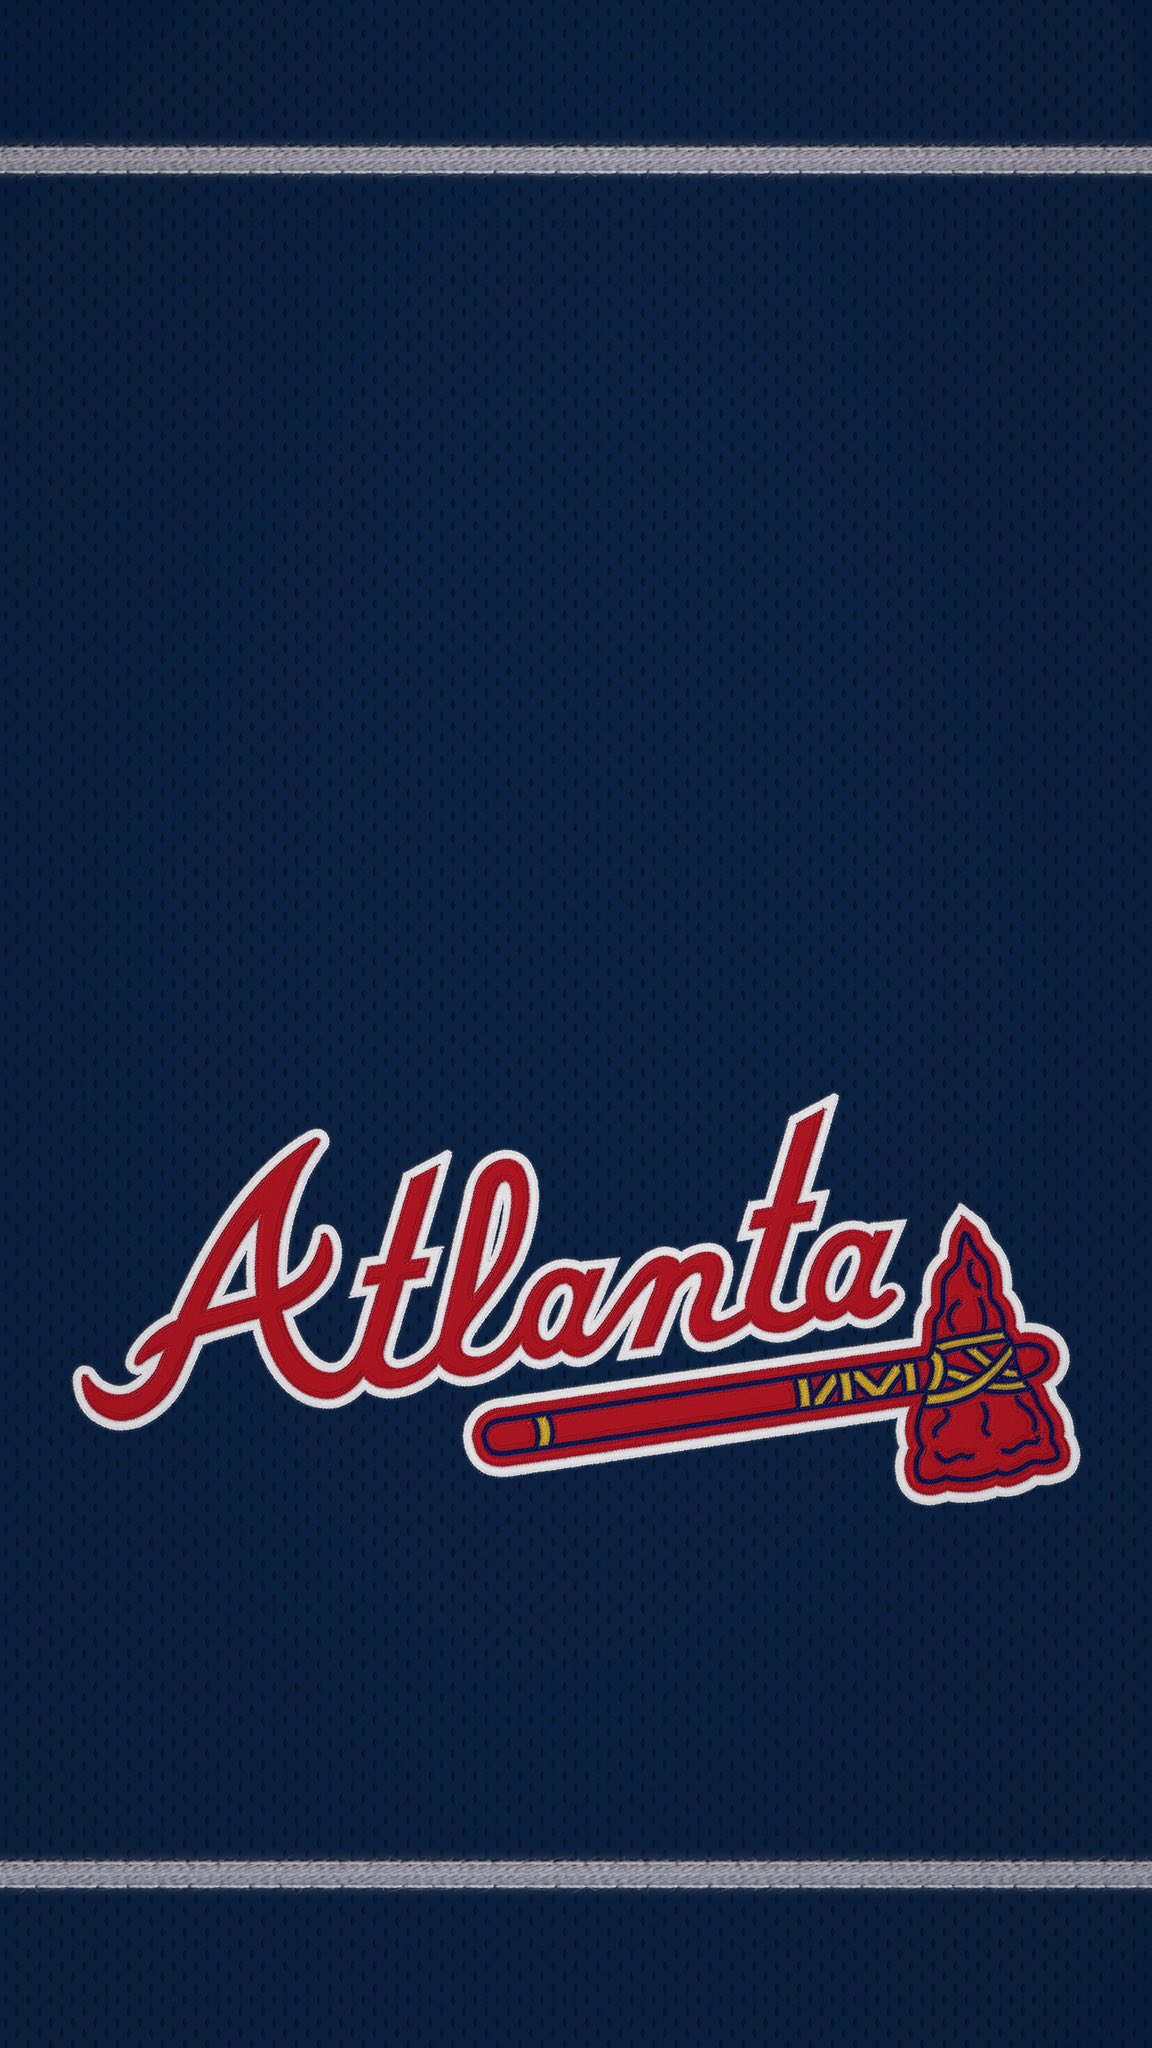 Atlanta Braves on X: Here's a #WallpaperWednesday to get your